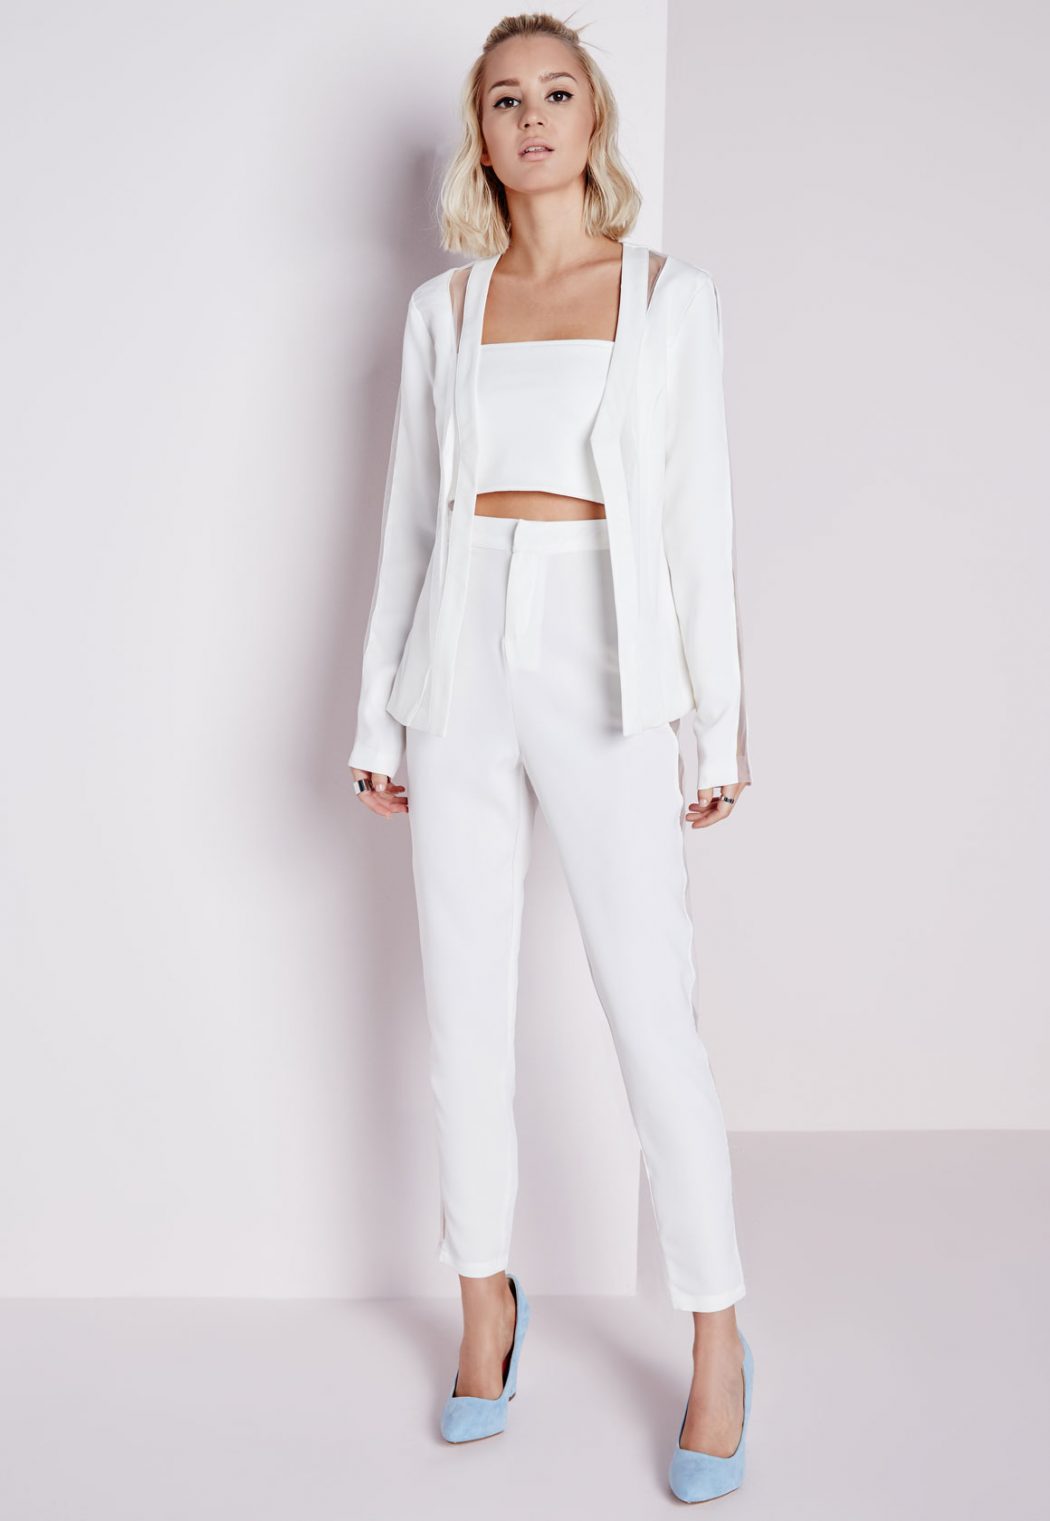 White Trousers1 20+ Hottest White Party Outfits Ideas for Women - 11